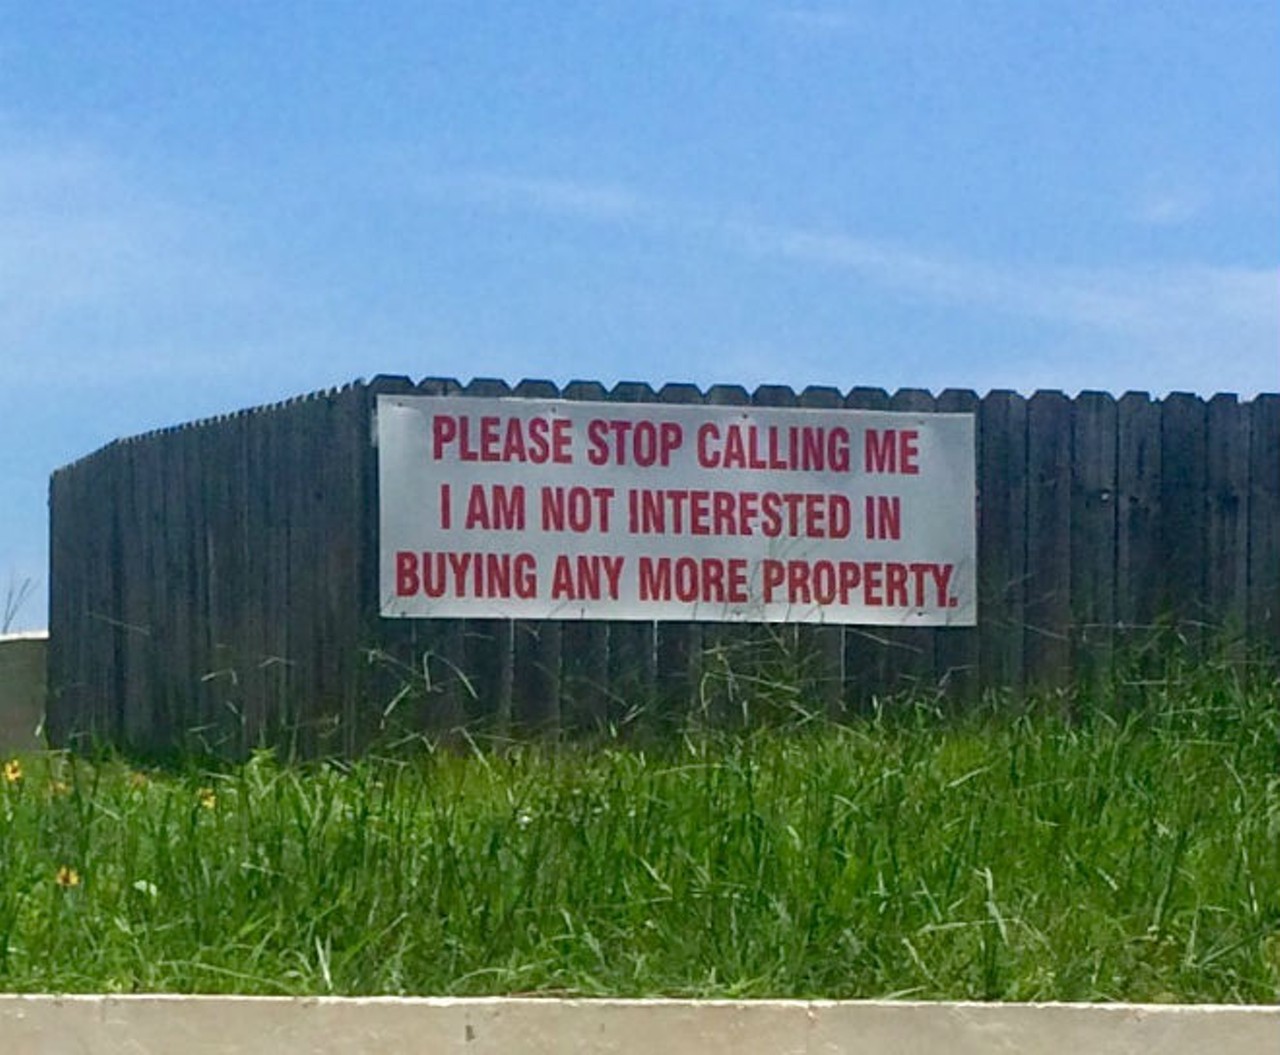 This sign was spotted in Daytona Beach.